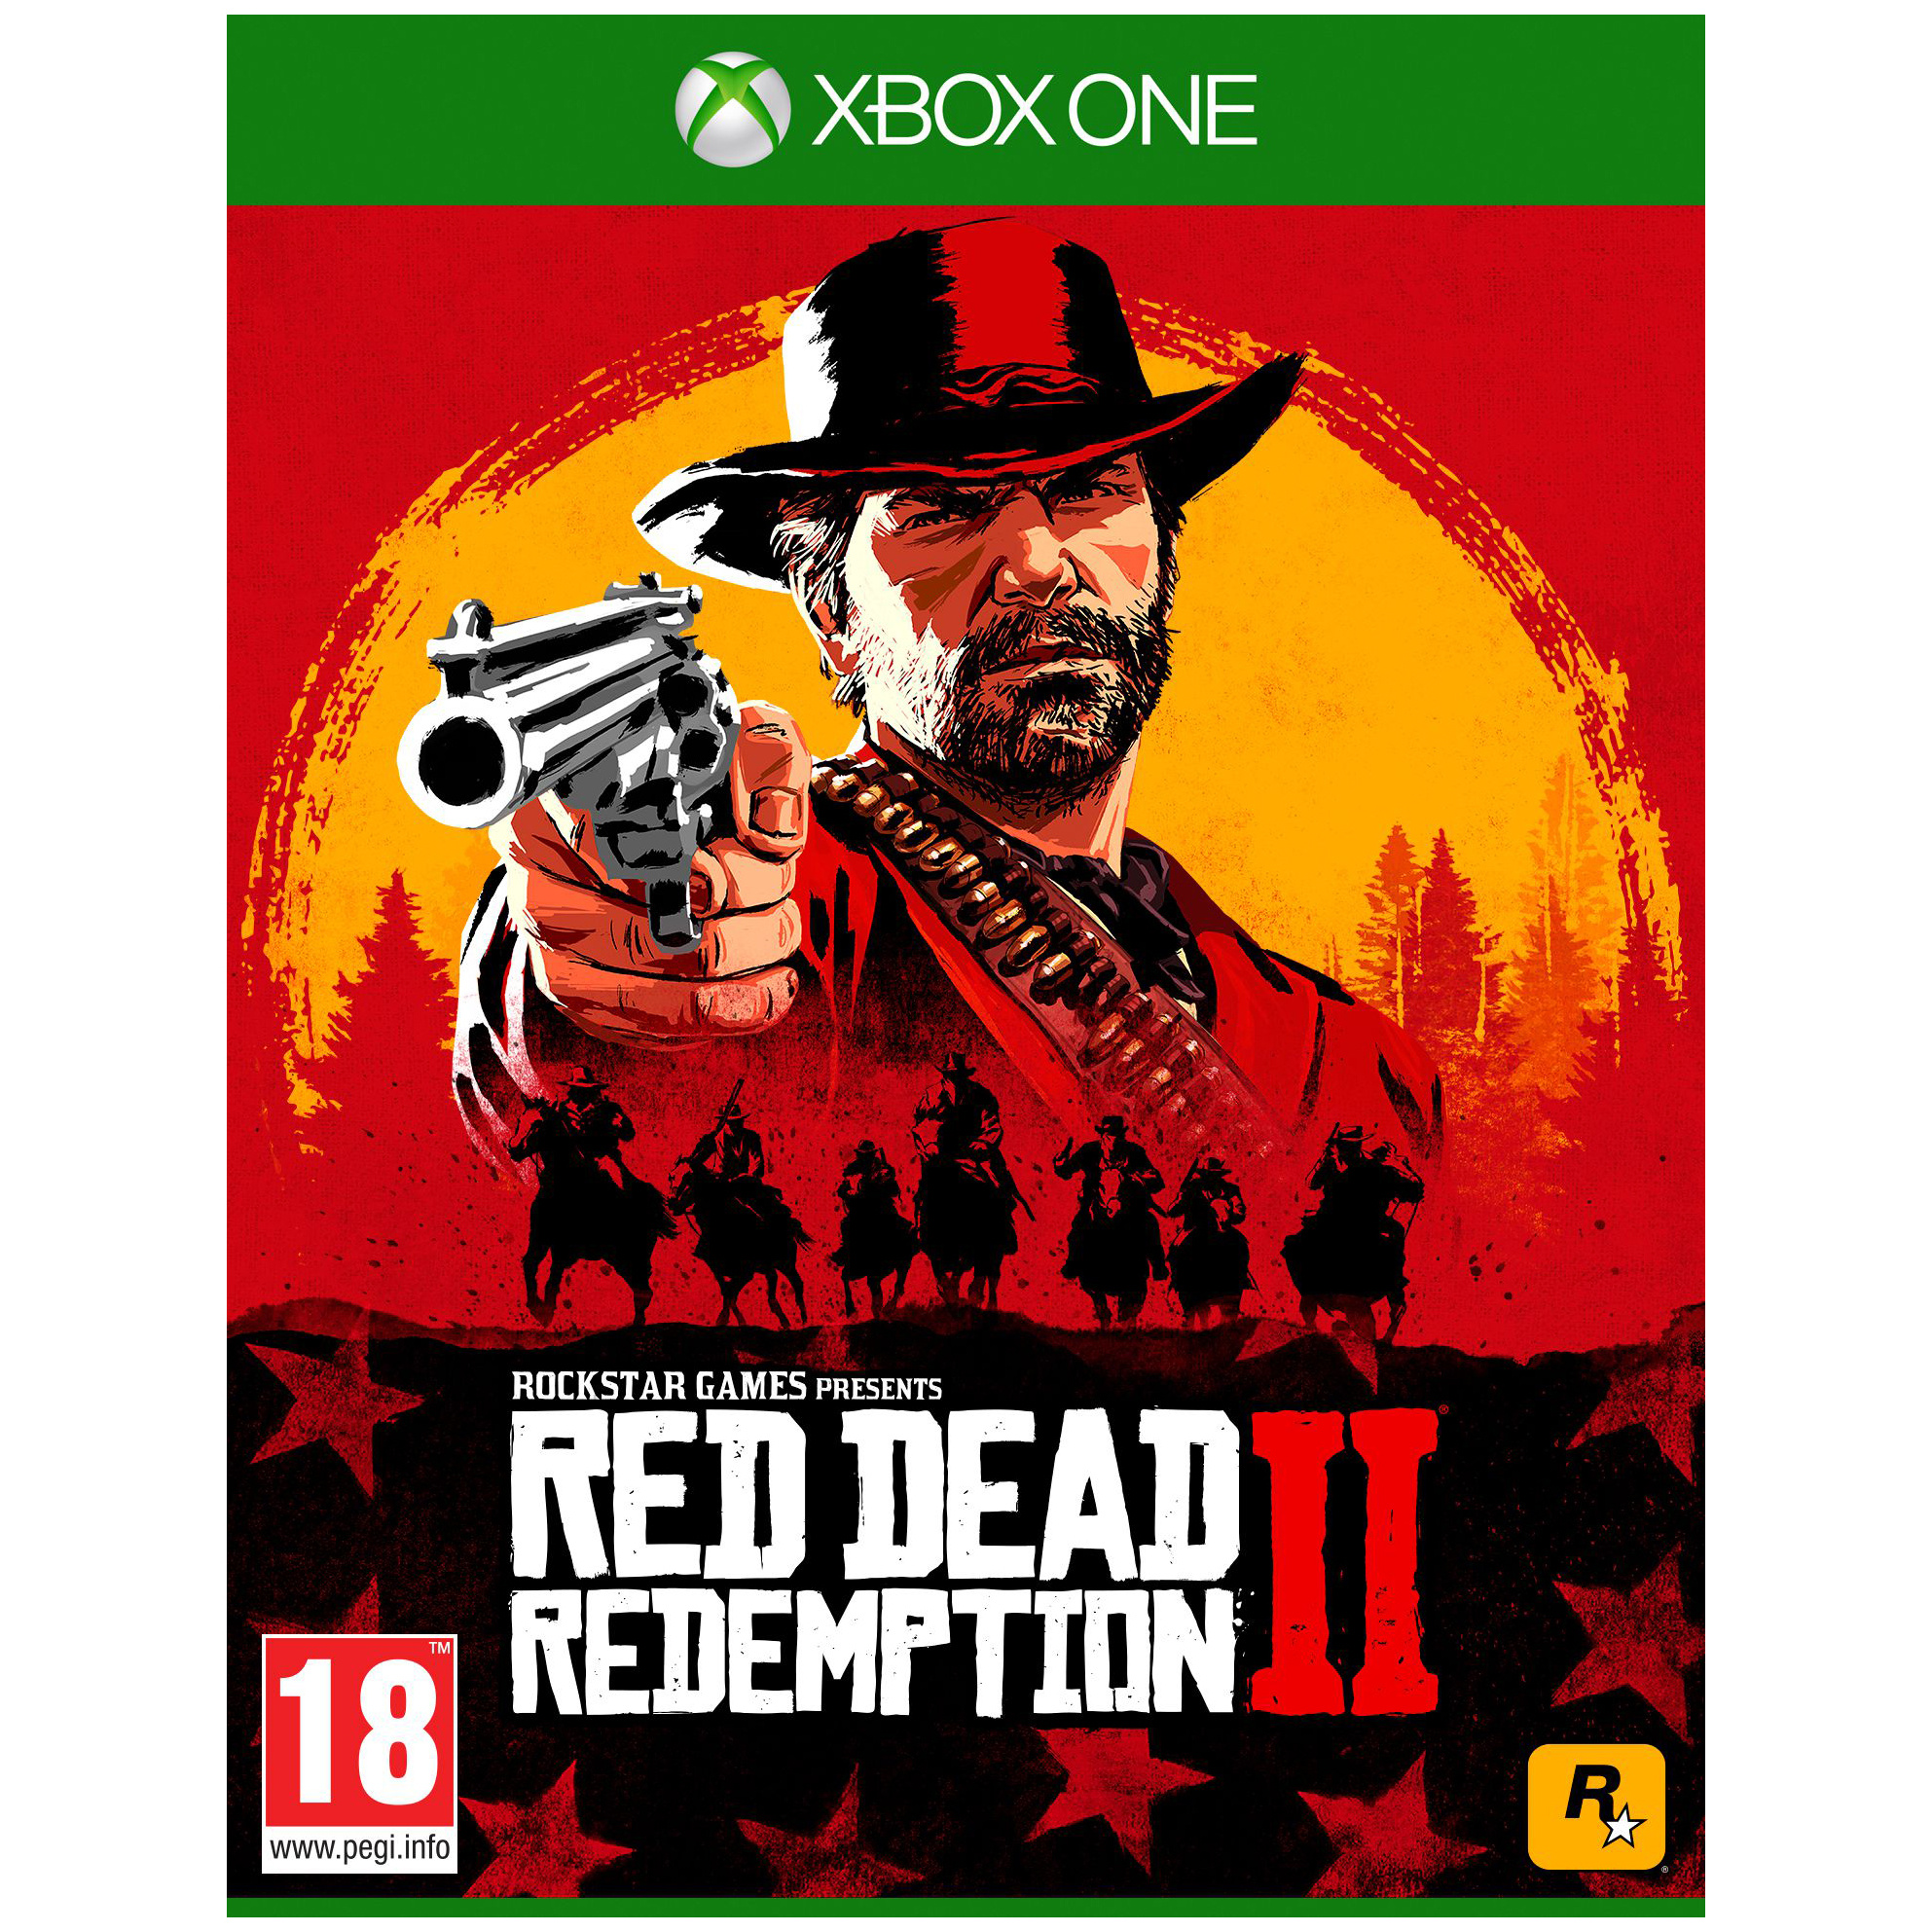 Ред дем 2. Red Dead Redemption 2 Ultimate Edition ps4. Red Dead Redemption 2 ps4 диск. Red Dead Redemption 2 диск пс4. Red Dead Redemption 2 на пс4.